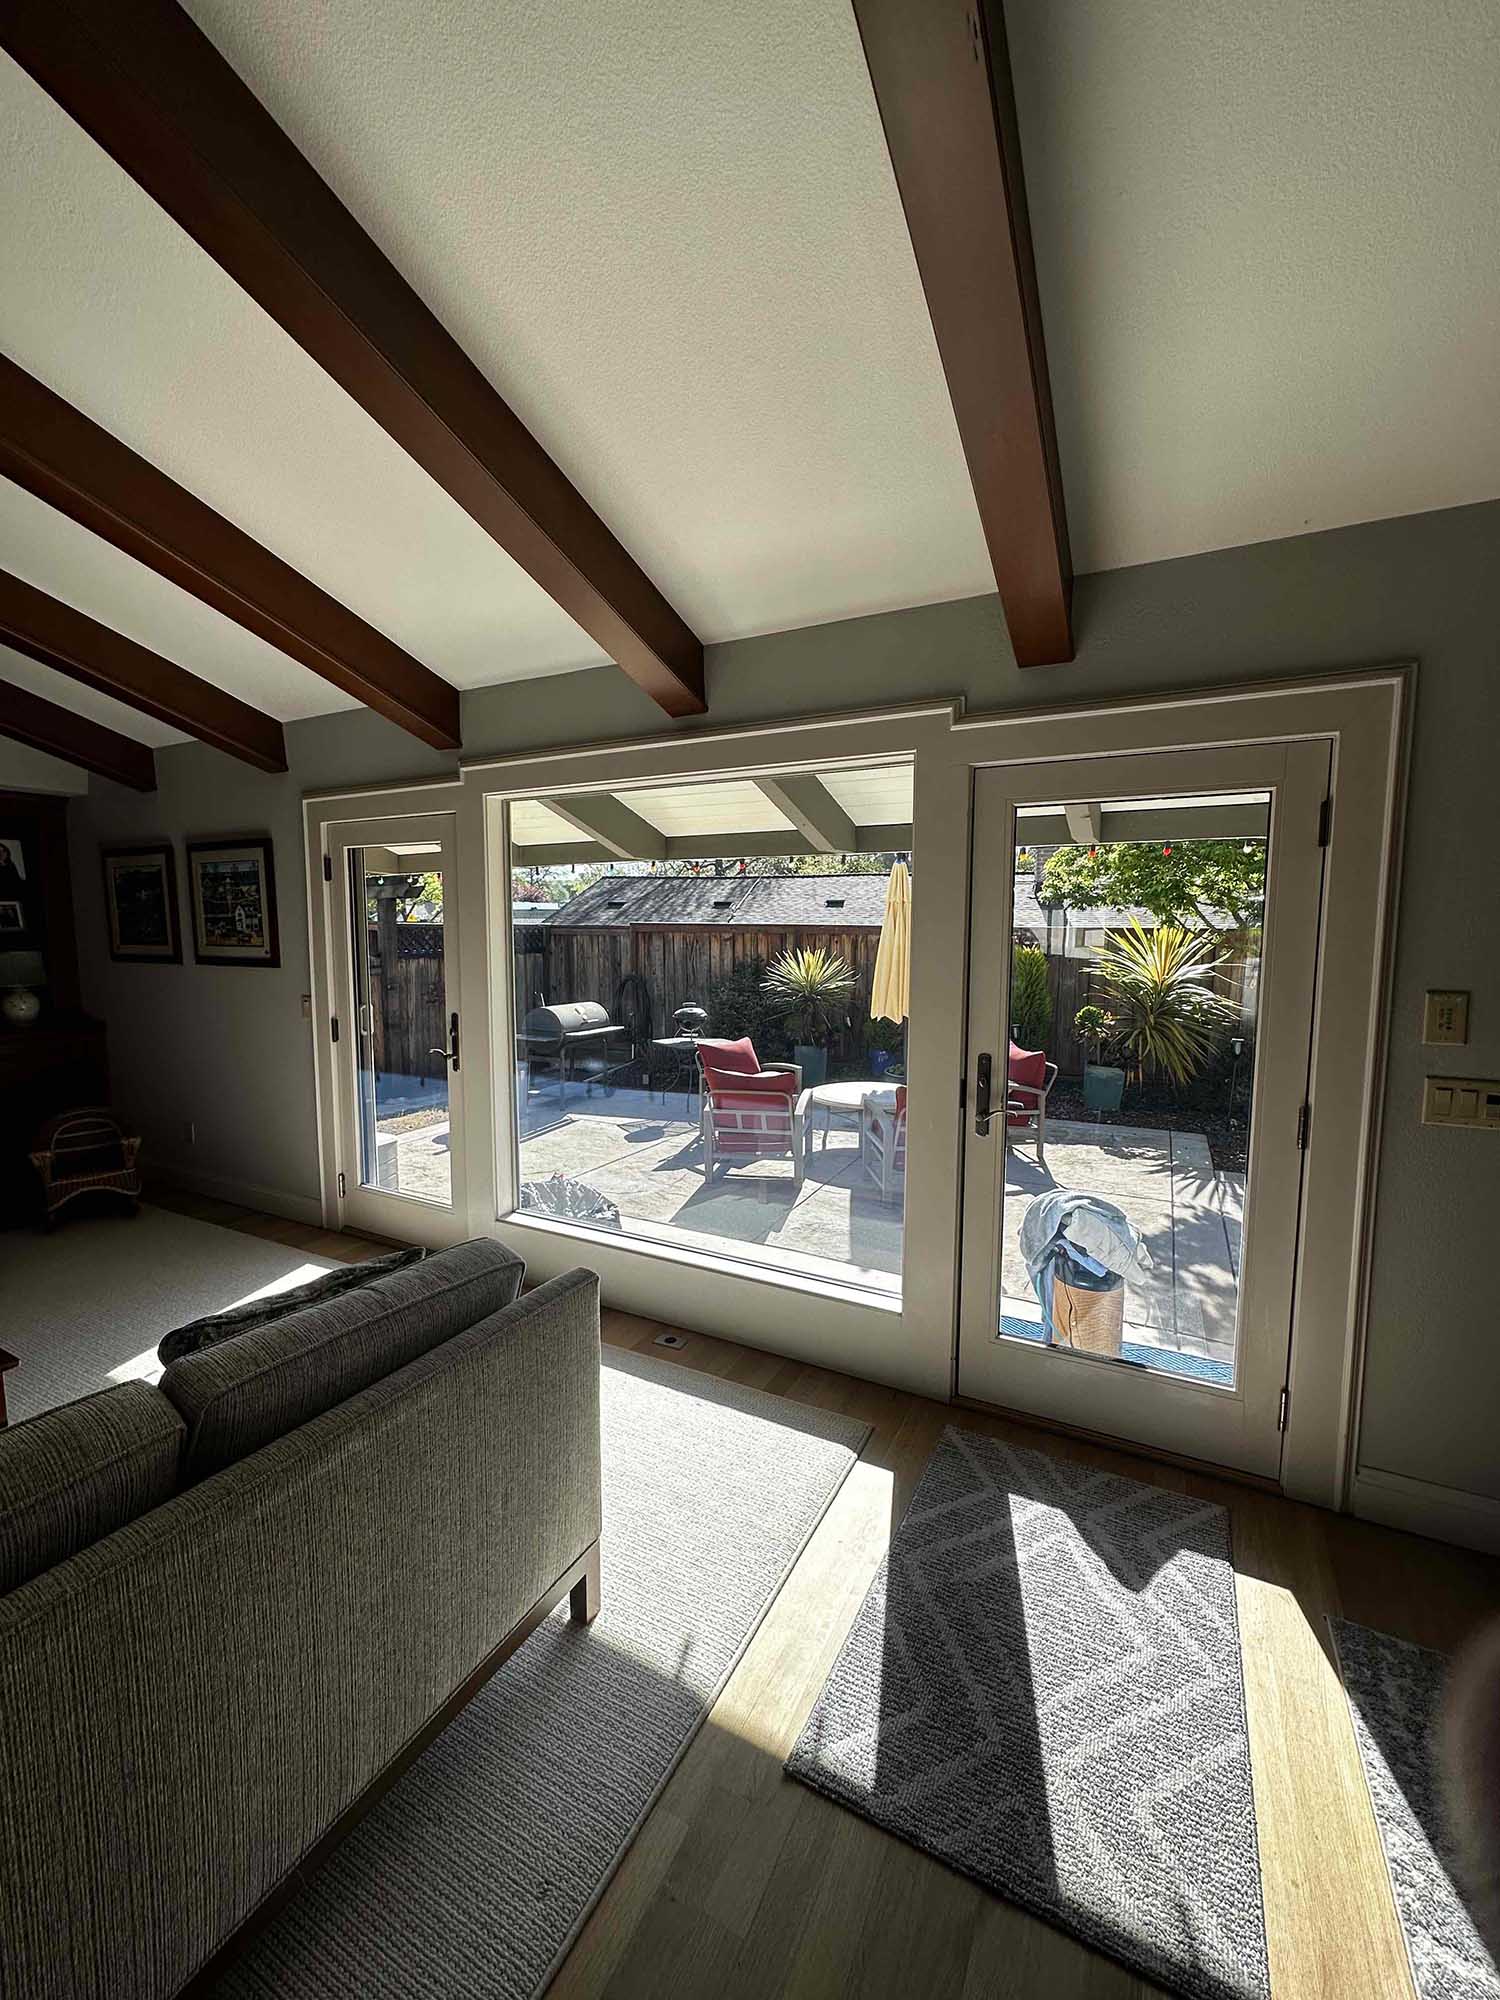 3M Safety and Security Window Film is a must-have for Pleasanton, CA, homes.